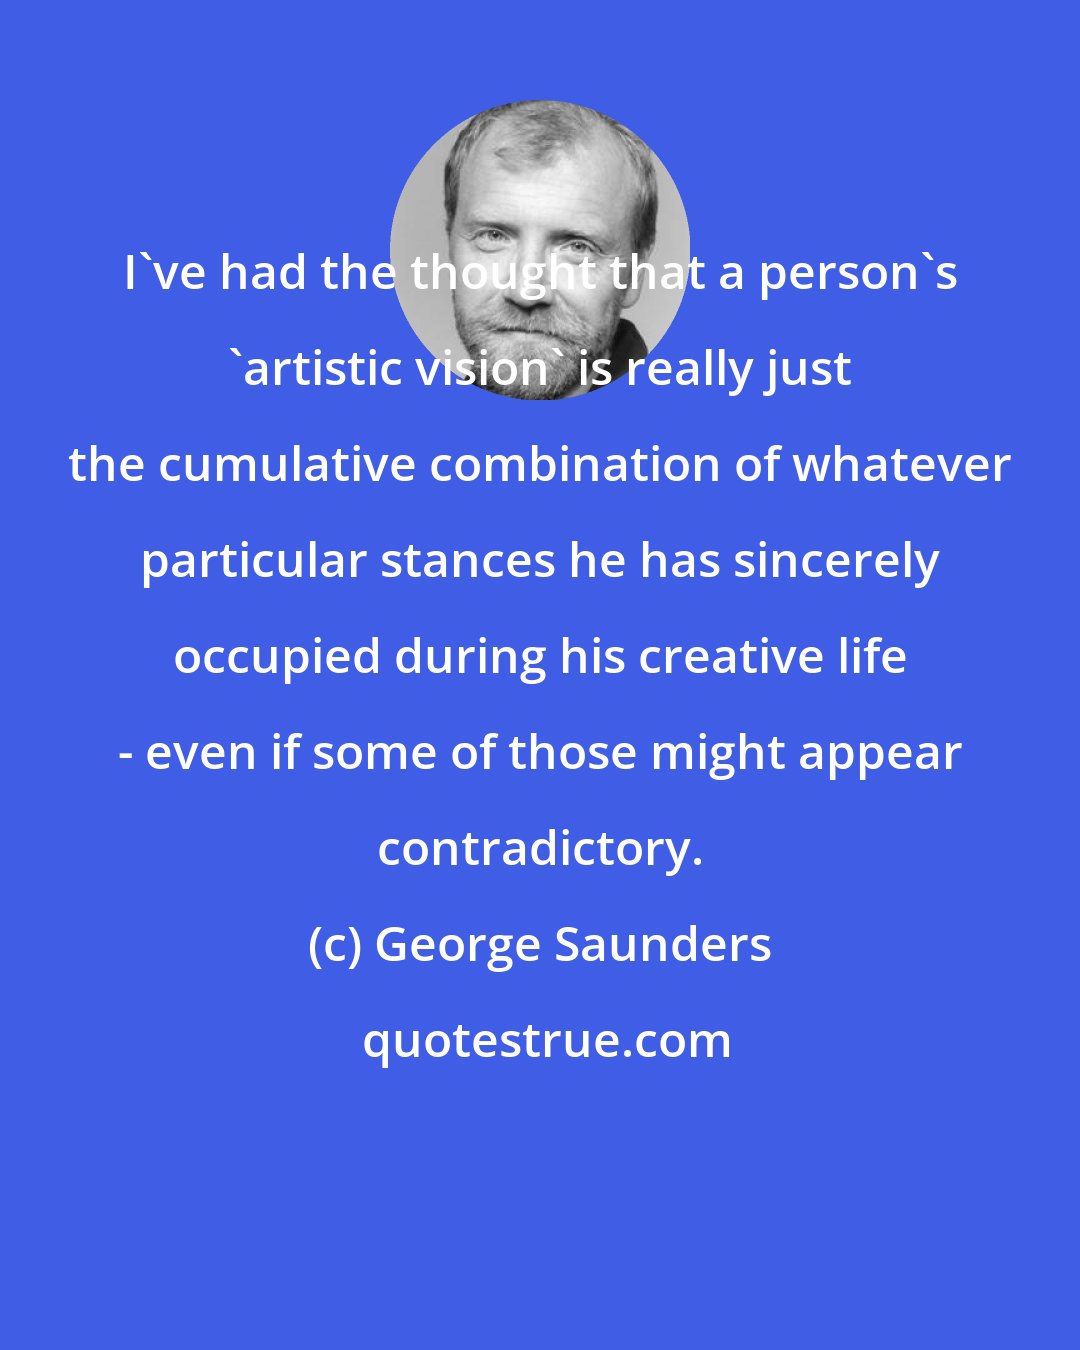 George Saunders: I've had the thought that a person's 'artistic vision' is really just the cumulative combination of whatever particular stances he has sincerely occupied during his creative life - even if some of those might appear contradictory.